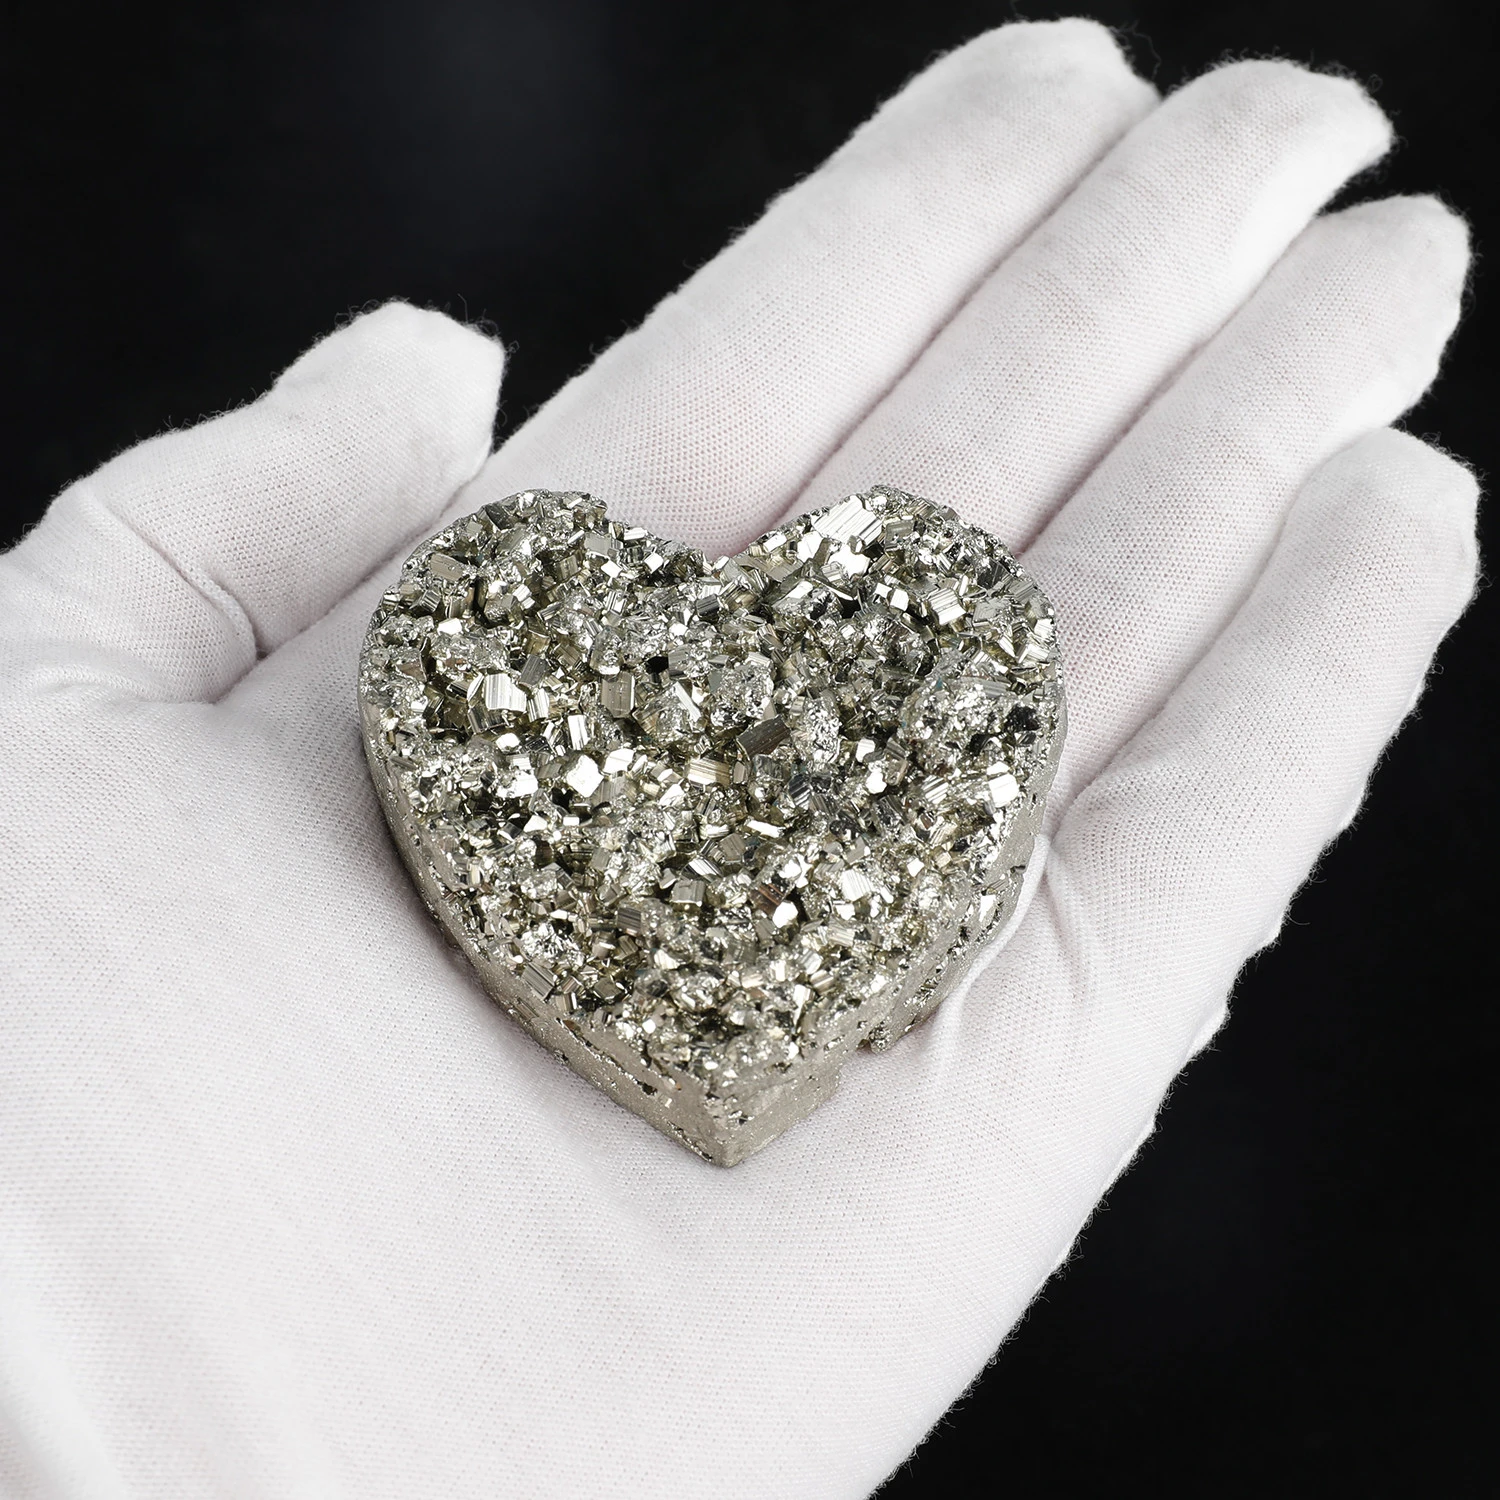 Heart Stone Pyrite Raw Material Healing Rock Mineral For Collection/DIY Decor